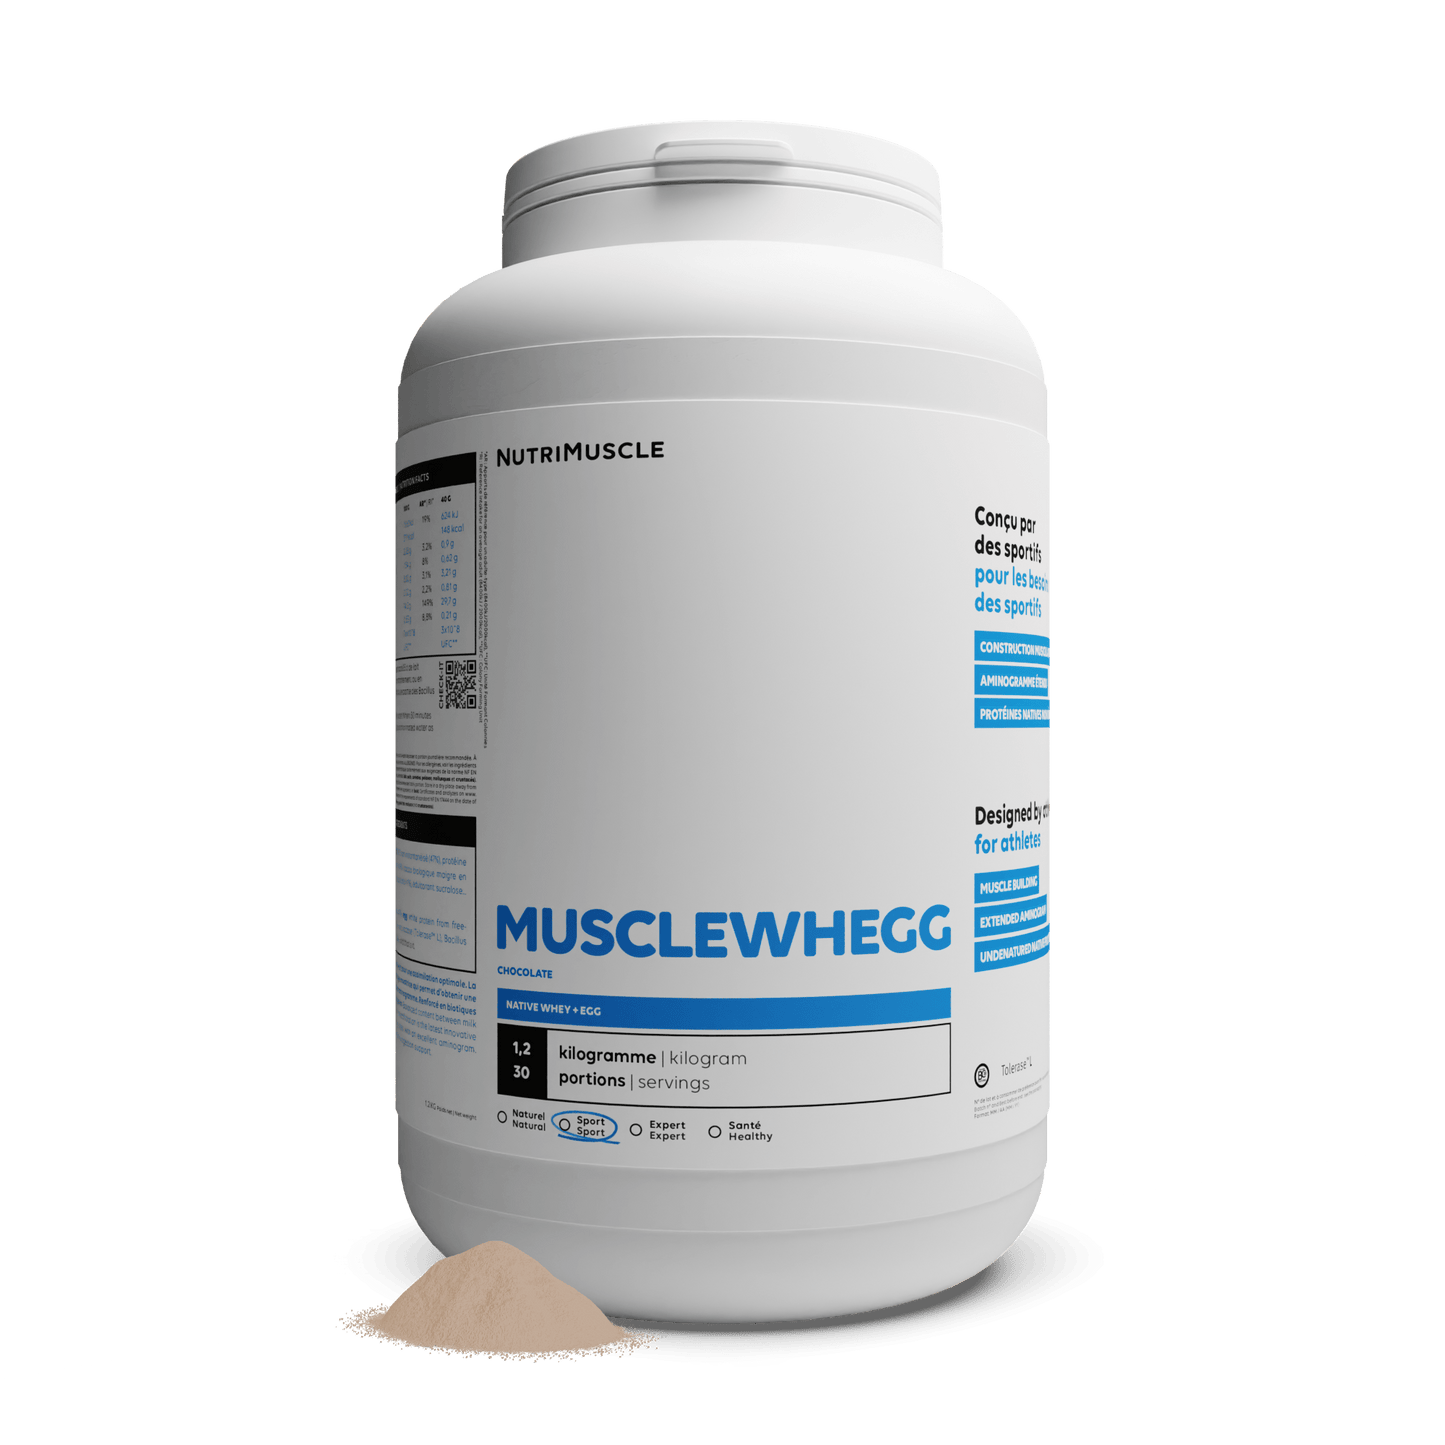 Nutrimuscle Protéines Chocolat / 1.20 kg Musclewhegg - Mix Protein